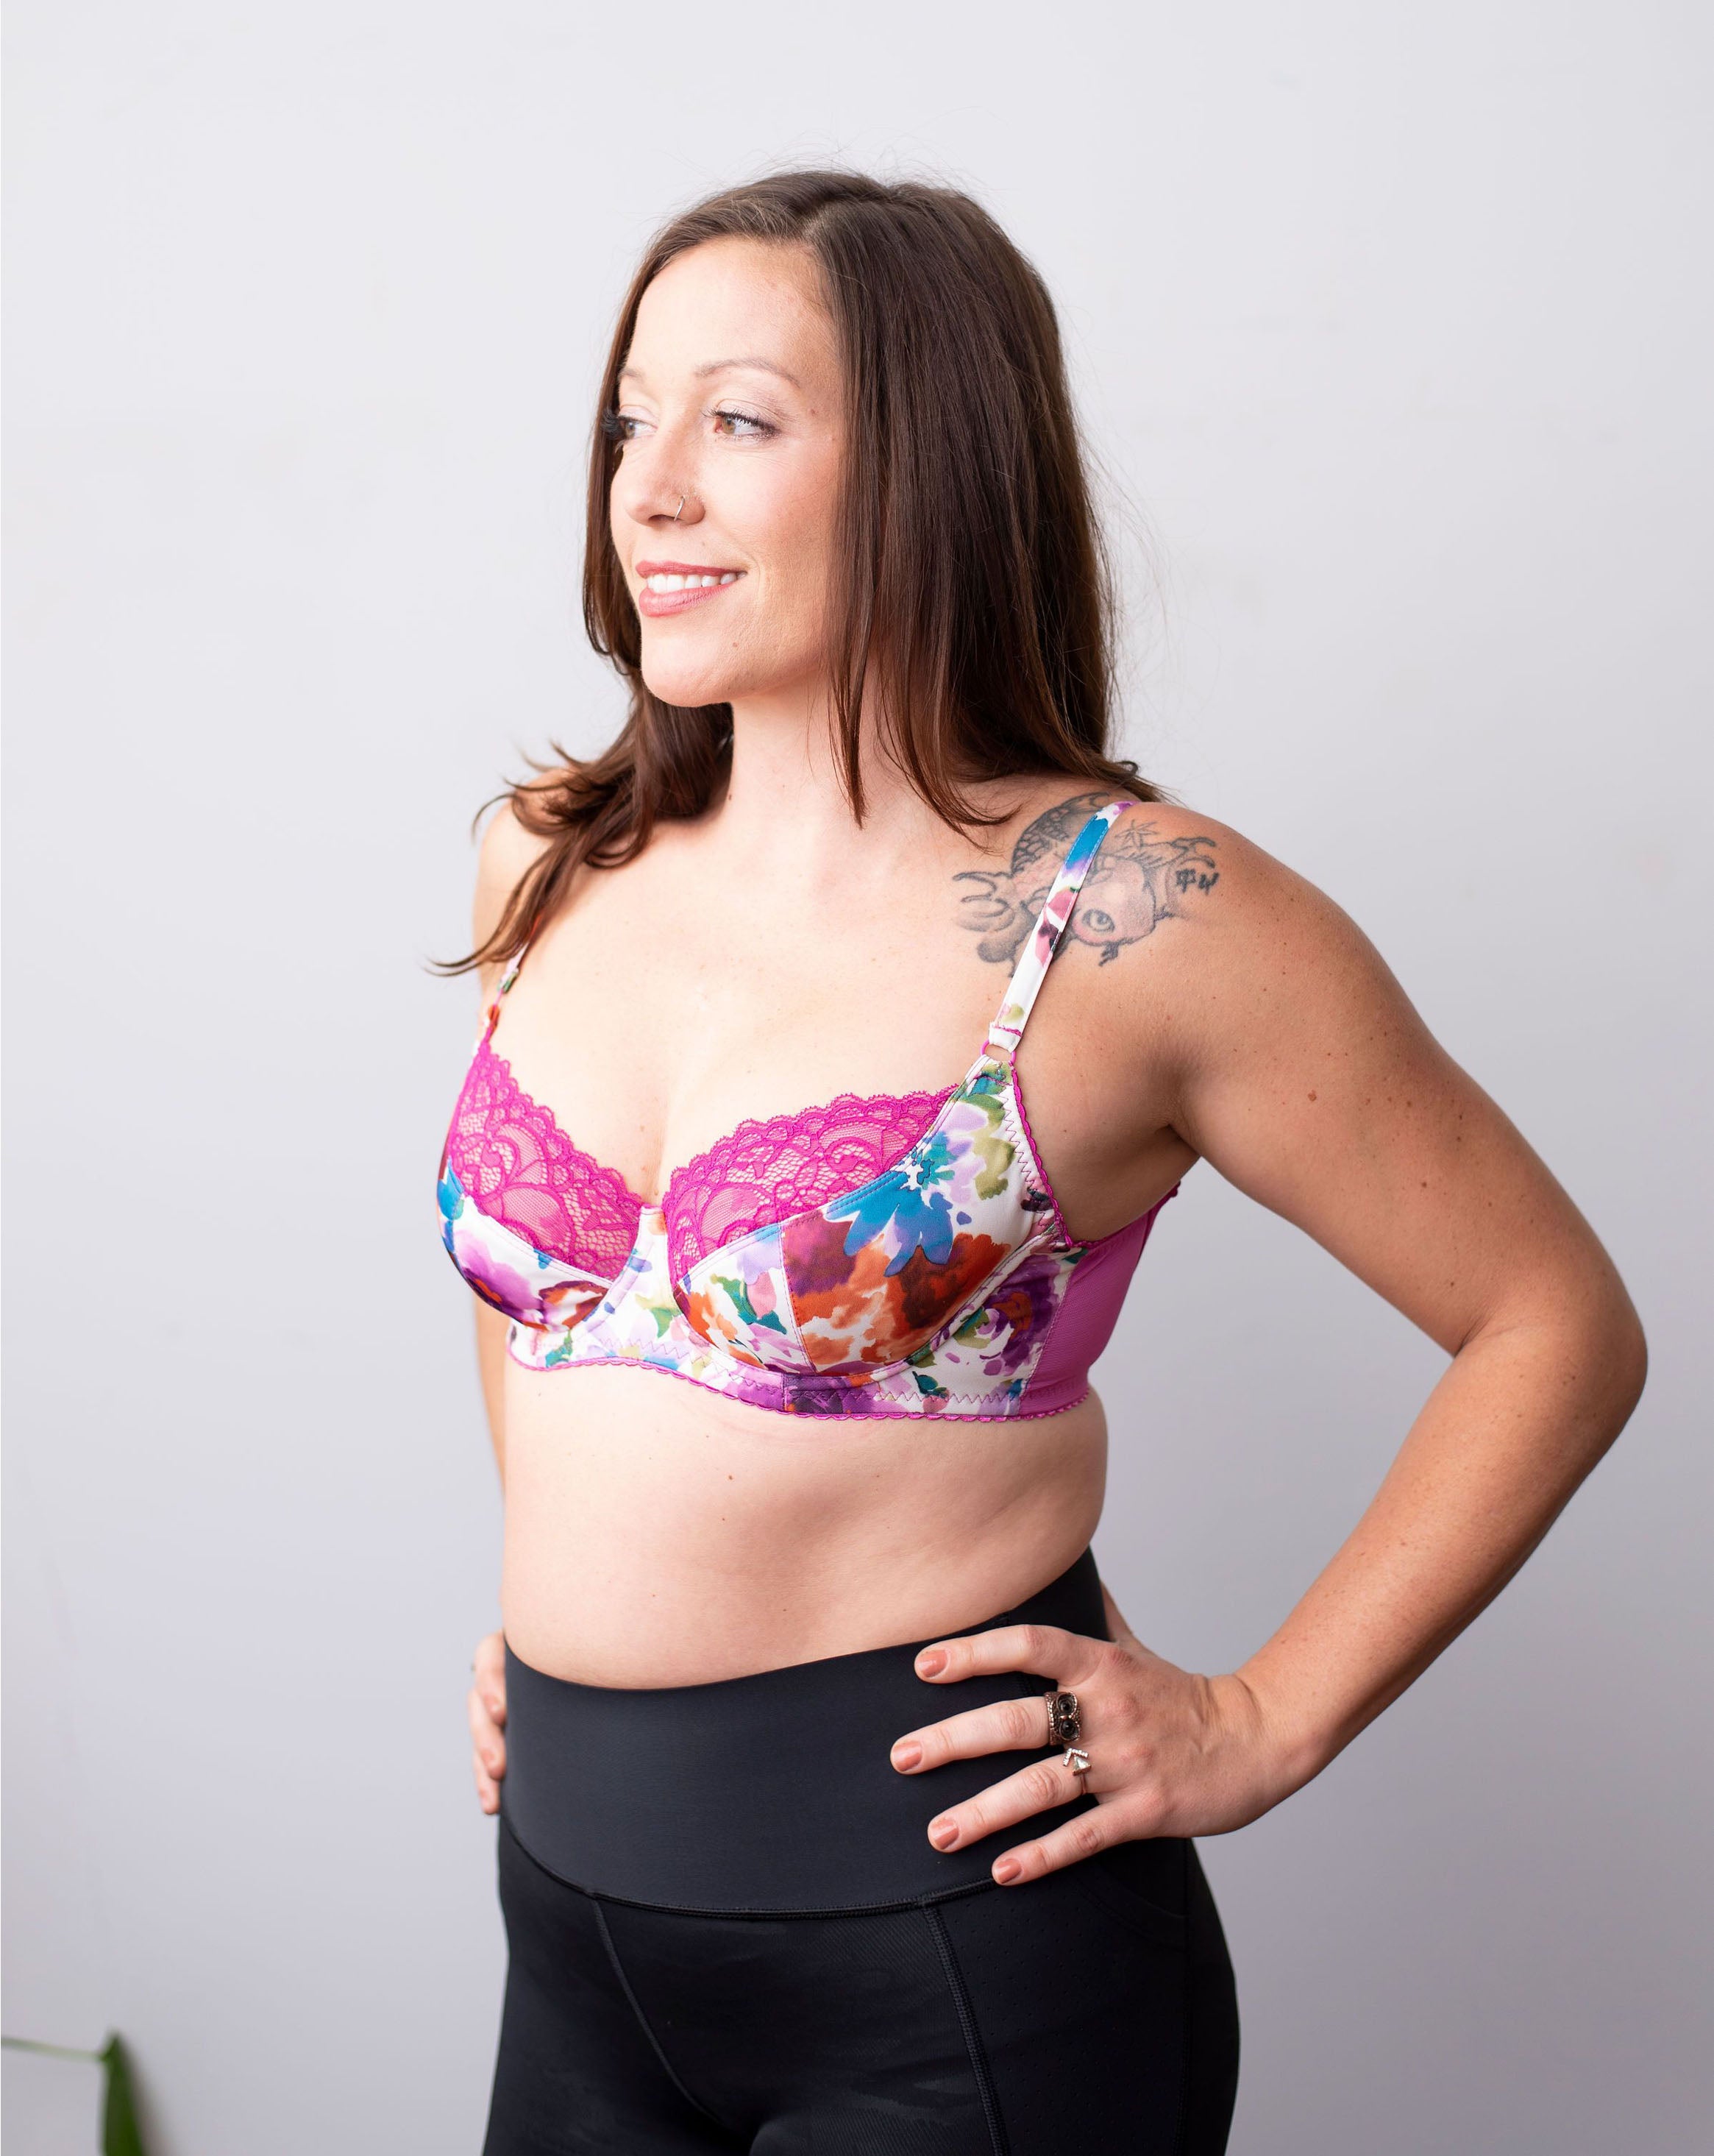 Model with straight brown hair stands with her hands on her waist. She wears a wired floral pink bra with hot pink lace. Half body frontal shot in front of a plain white background.